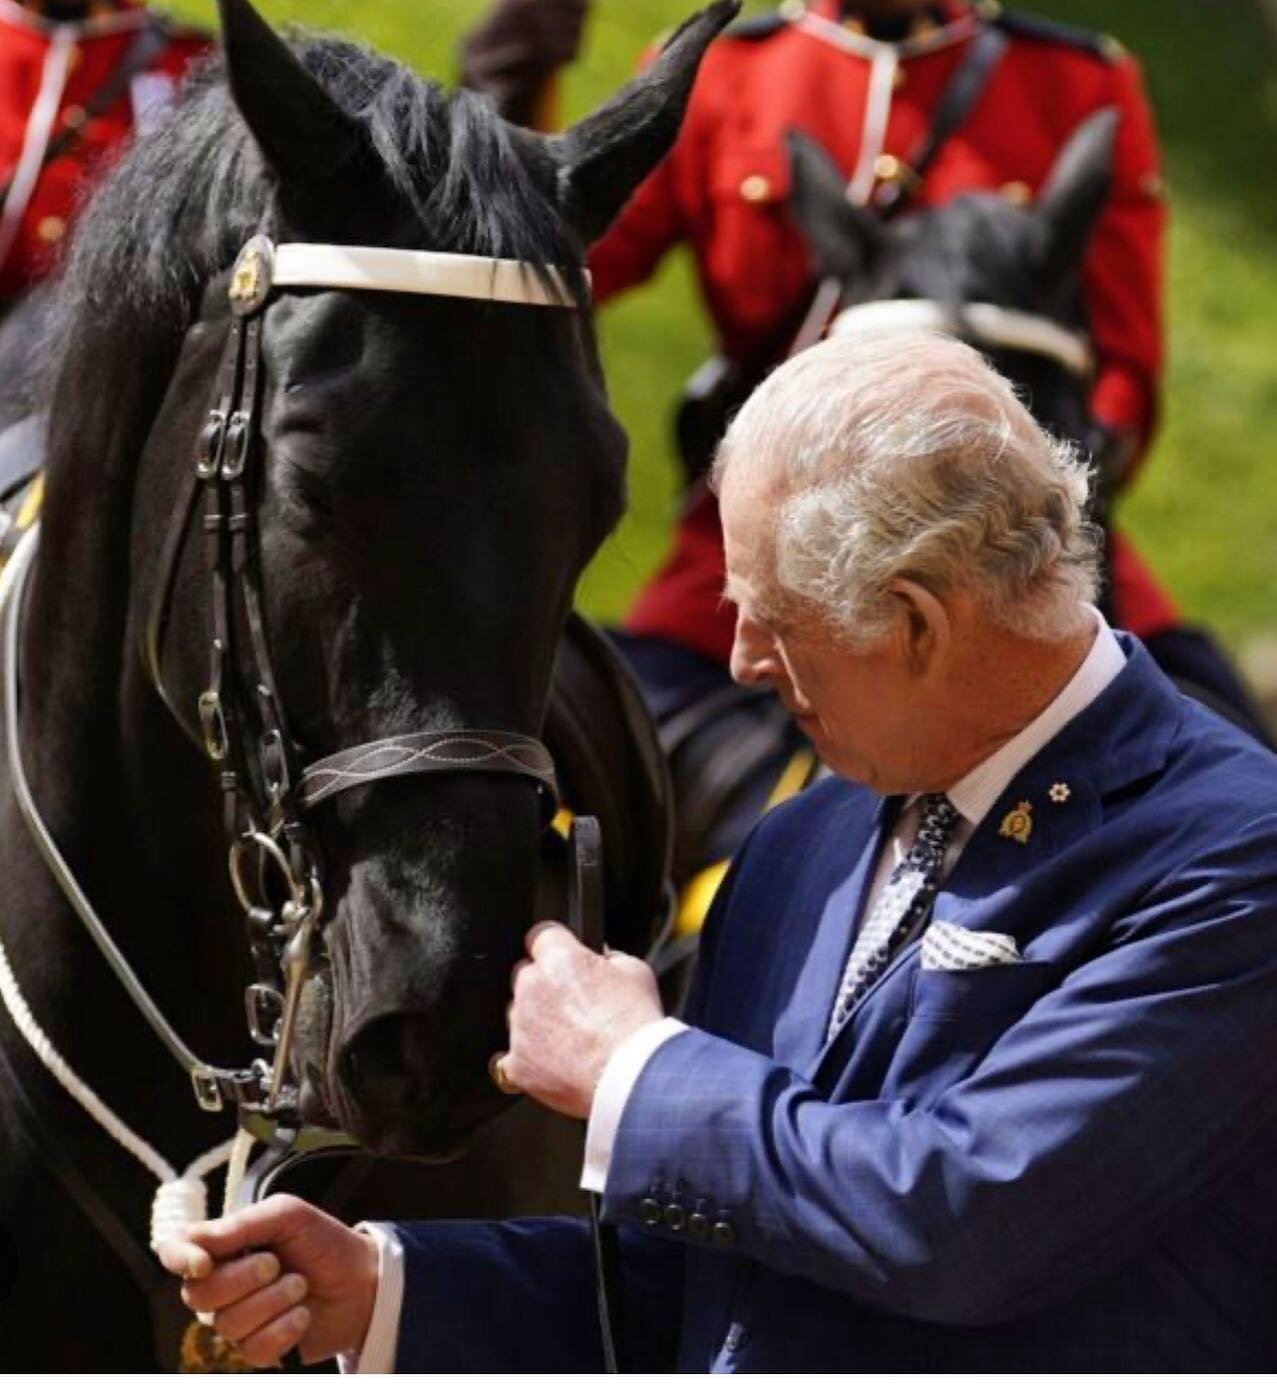 We will be raising a glass to The King today whilst we watch the Coronation with pride. #theking #coronation #royalty @buckinghampalace.official @household_cavalry #tradition #greatbritain🇬🇧 #monarchy #kingcharles